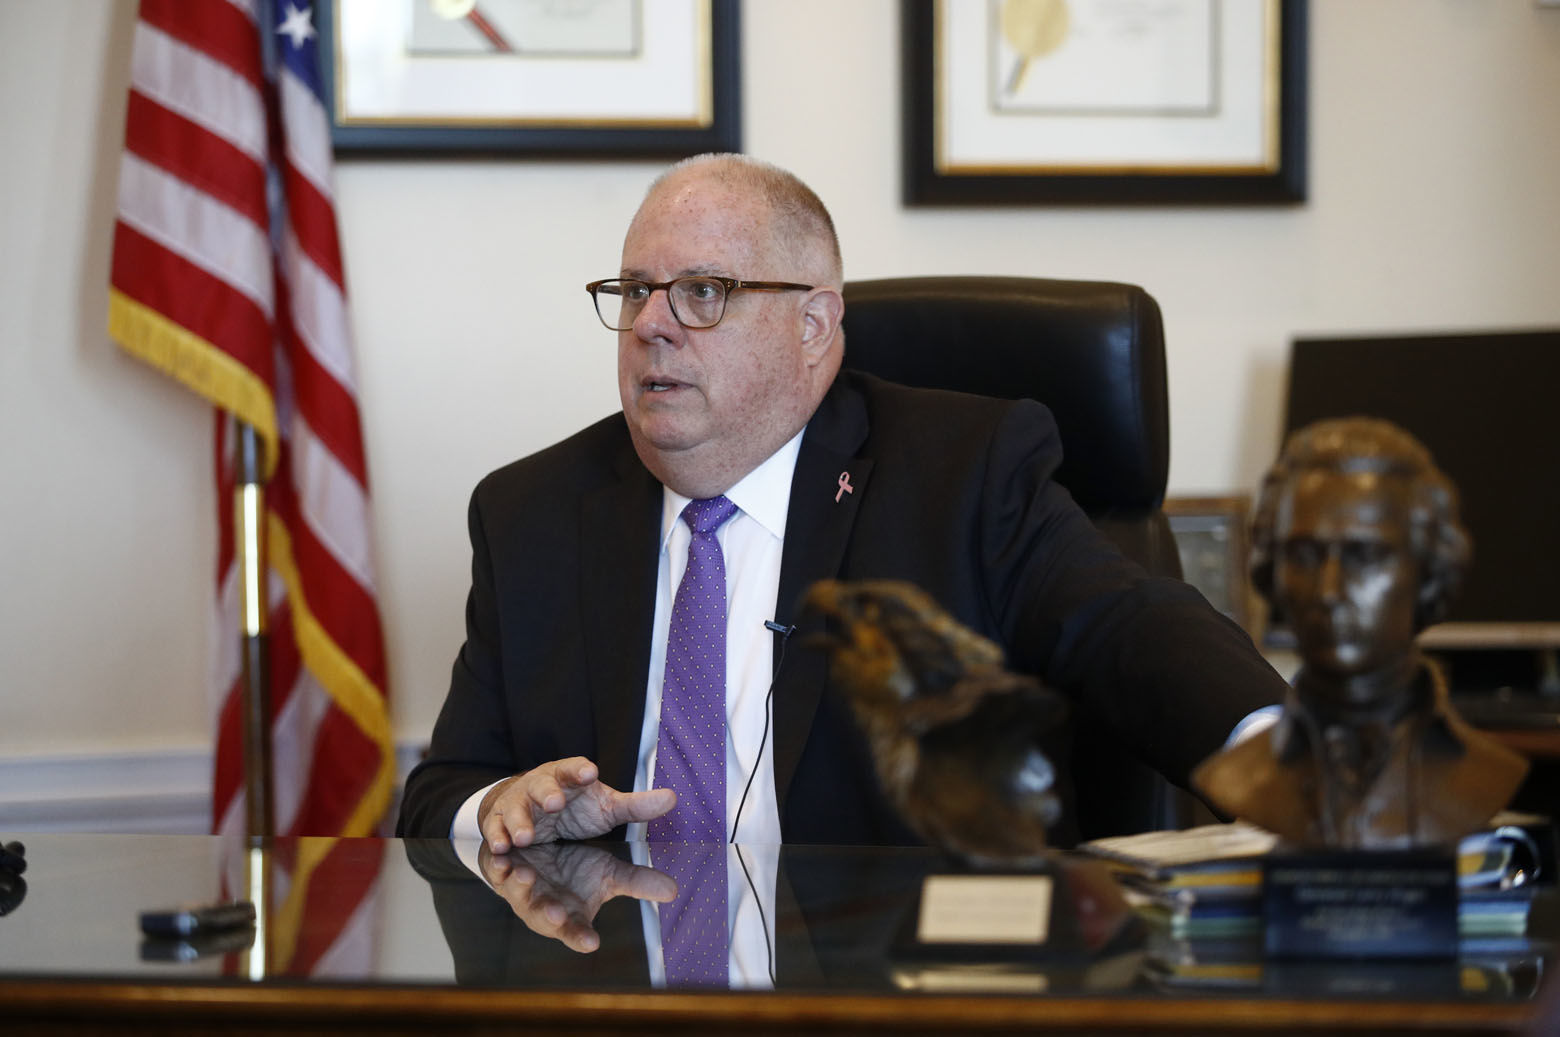 Maryland Gov. Larry Hogan speaks during an interview with The Associated Press, Thursday, Oct. 25, 2018, in his office at the Maryland State House in Annapolis, Md. Hogan is running for re-election against Democratic candidate Ben Jealous. (AP Photo/Patrick Semansky)